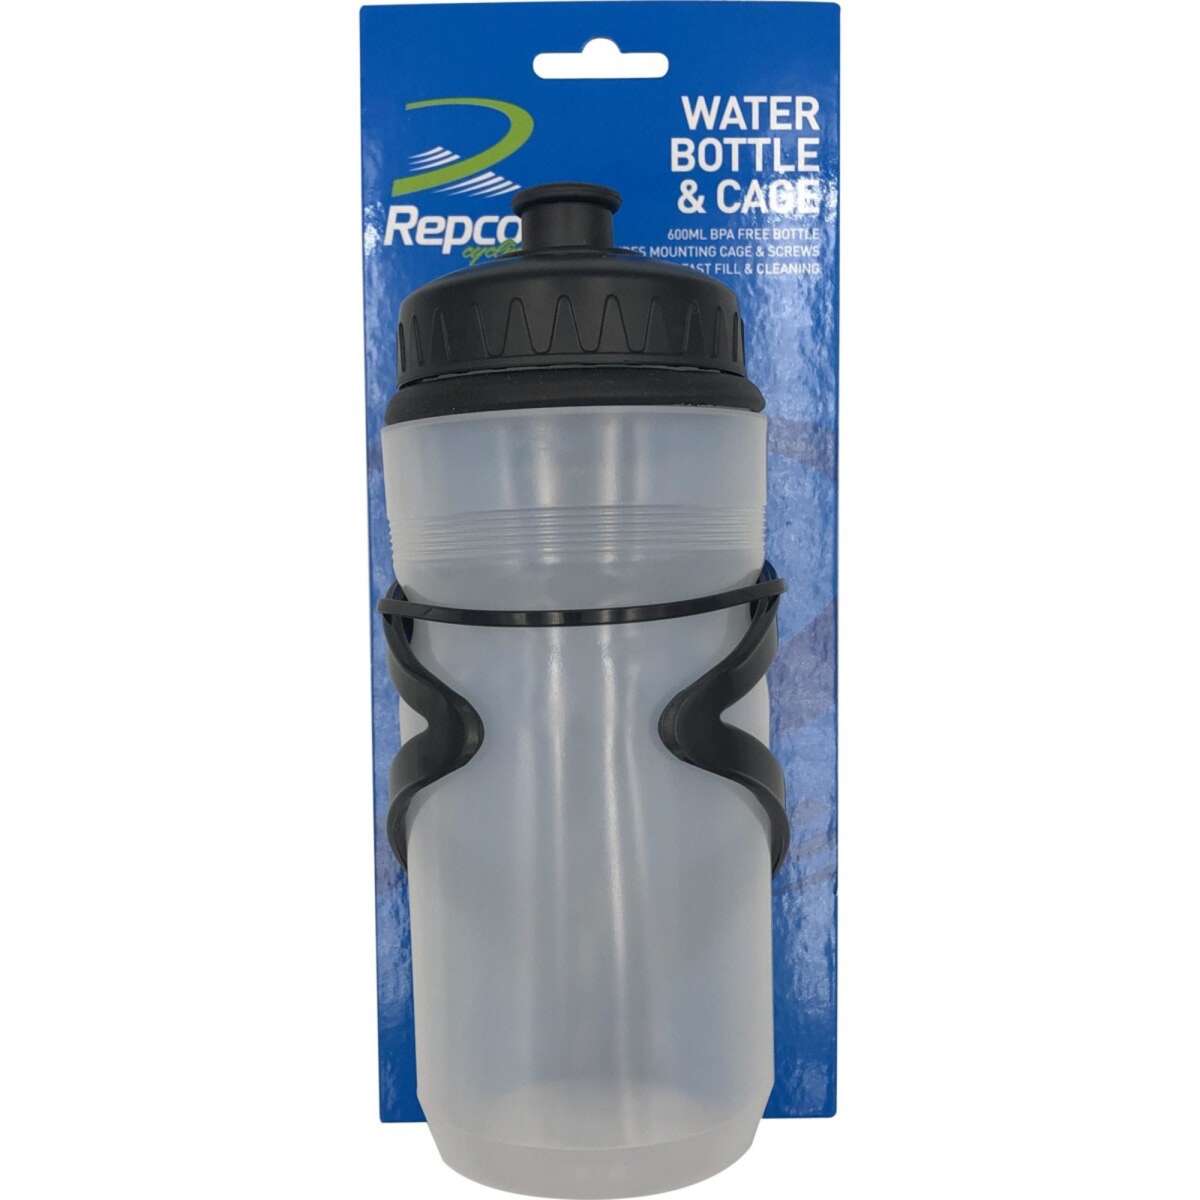 Repco Water Bottle And Cage